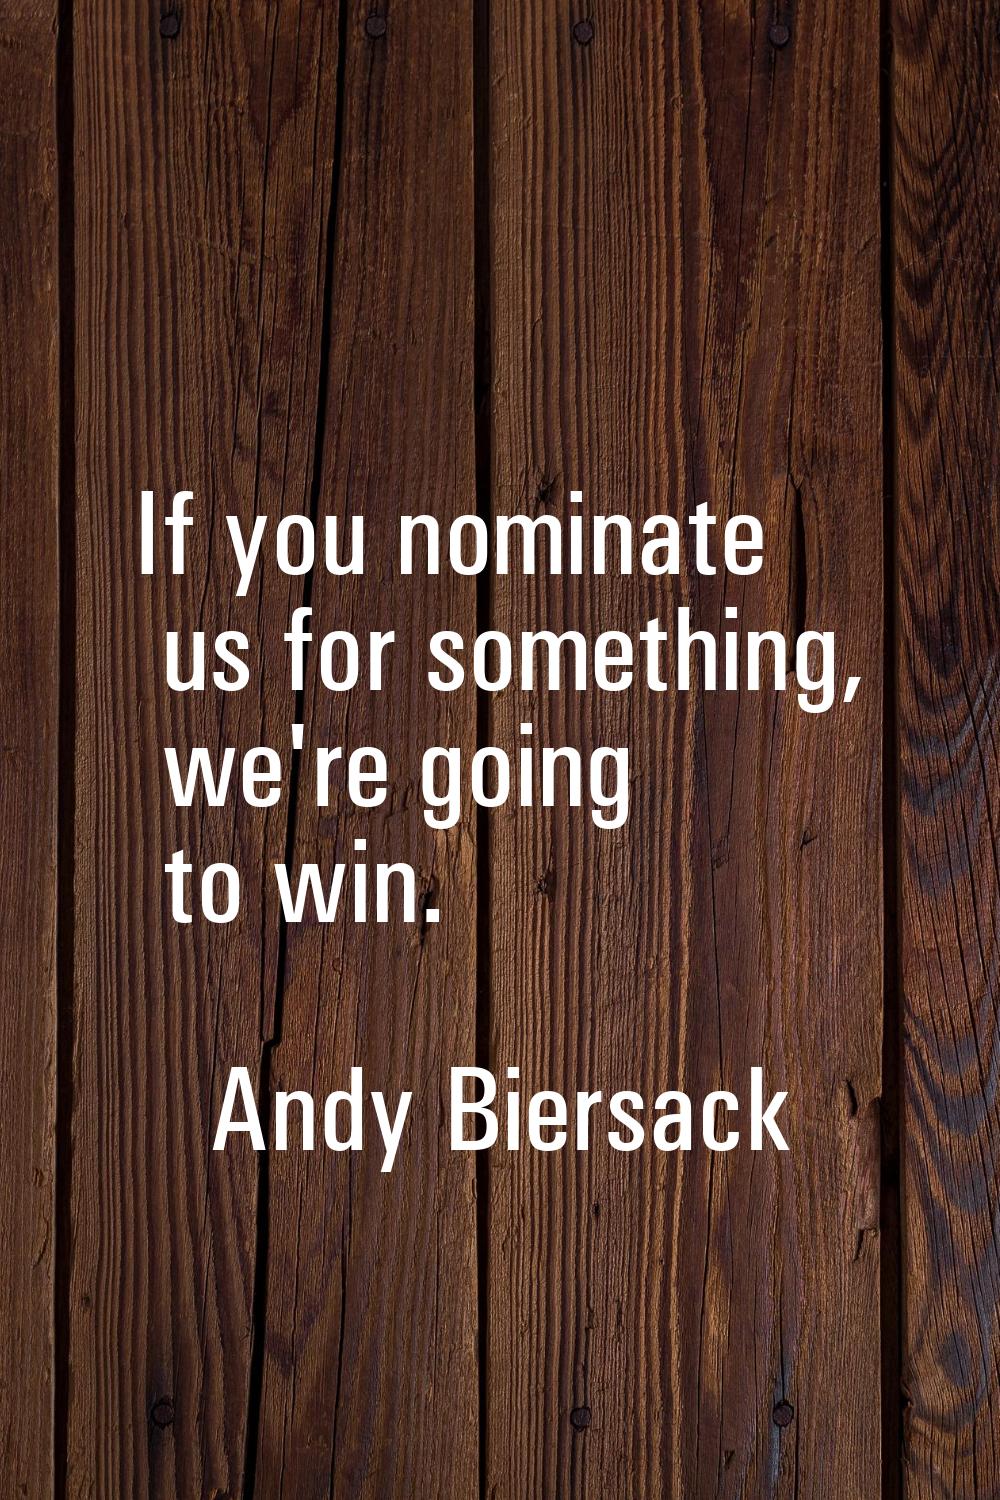 If you nominate us for something, we're going to win.